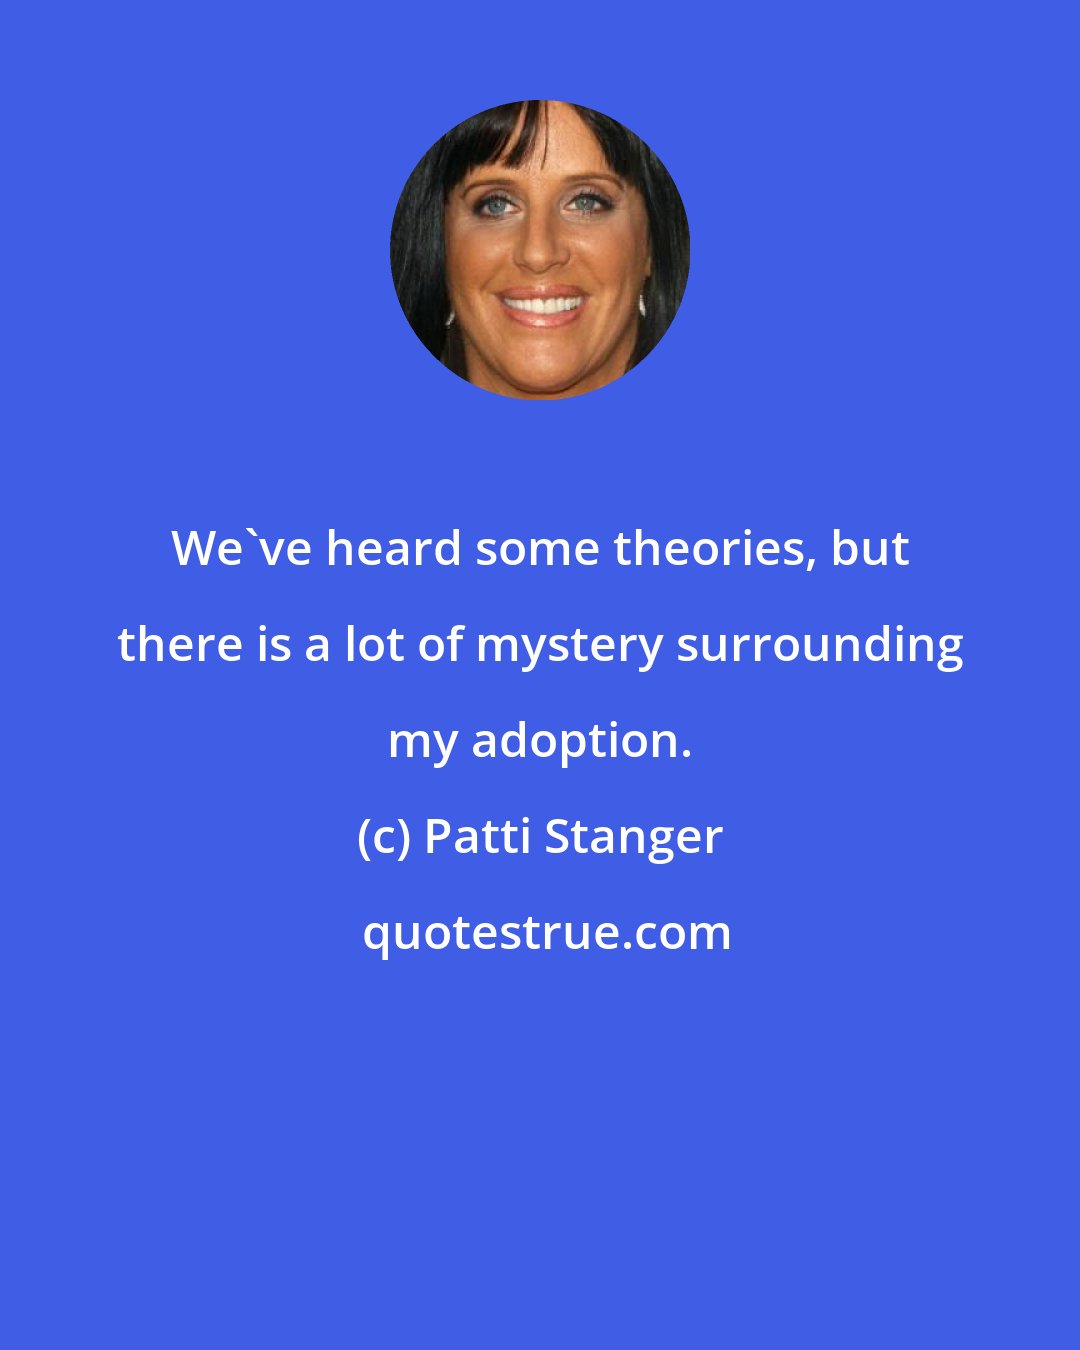 Patti Stanger: We've heard some theories, but there is a lot of mystery surrounding my adoption.